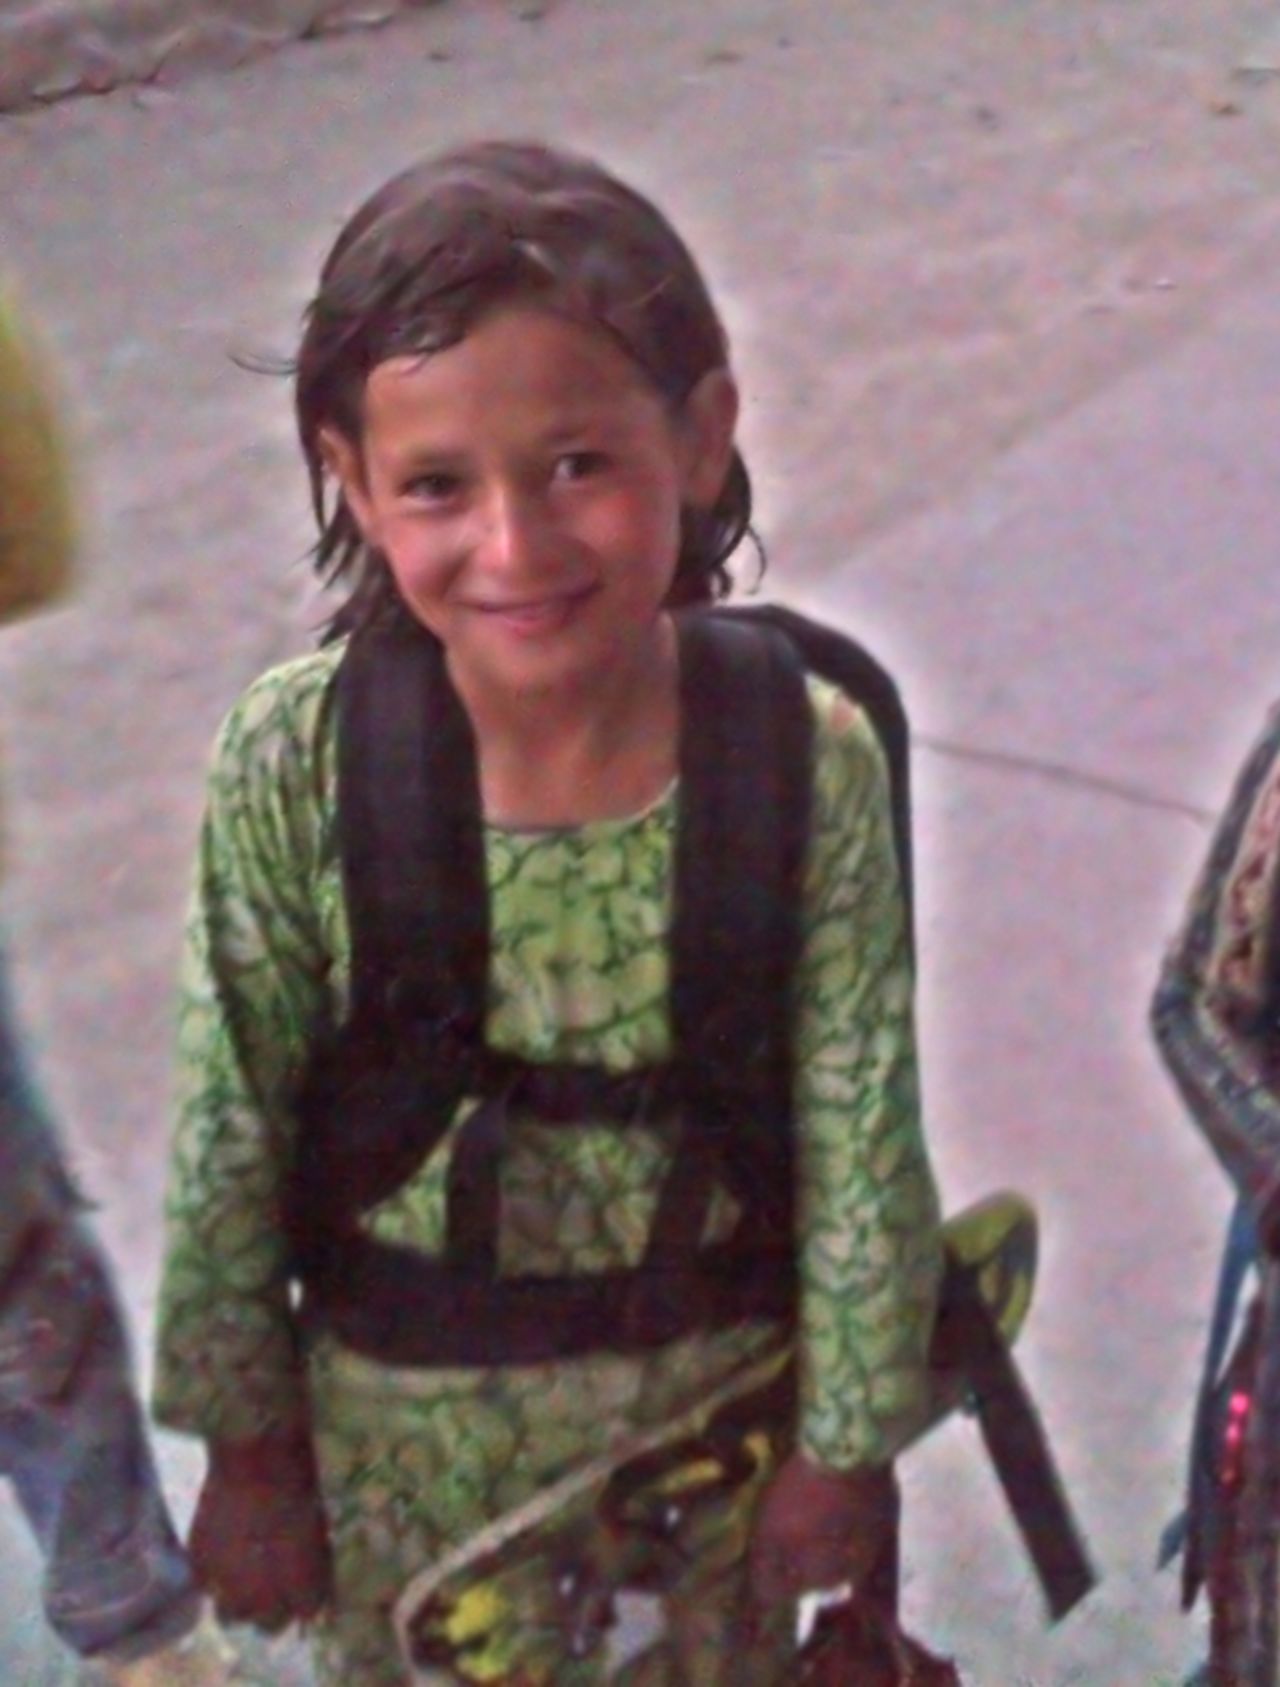 Just one week before her death, Parwana signed up as a member of <a href="http://www.skateistan.org/blog/tragic-loss" target="_blank" target="_blank">Skateistan</a>, a charity that teaches street children how to skateboard while also giving them an education.